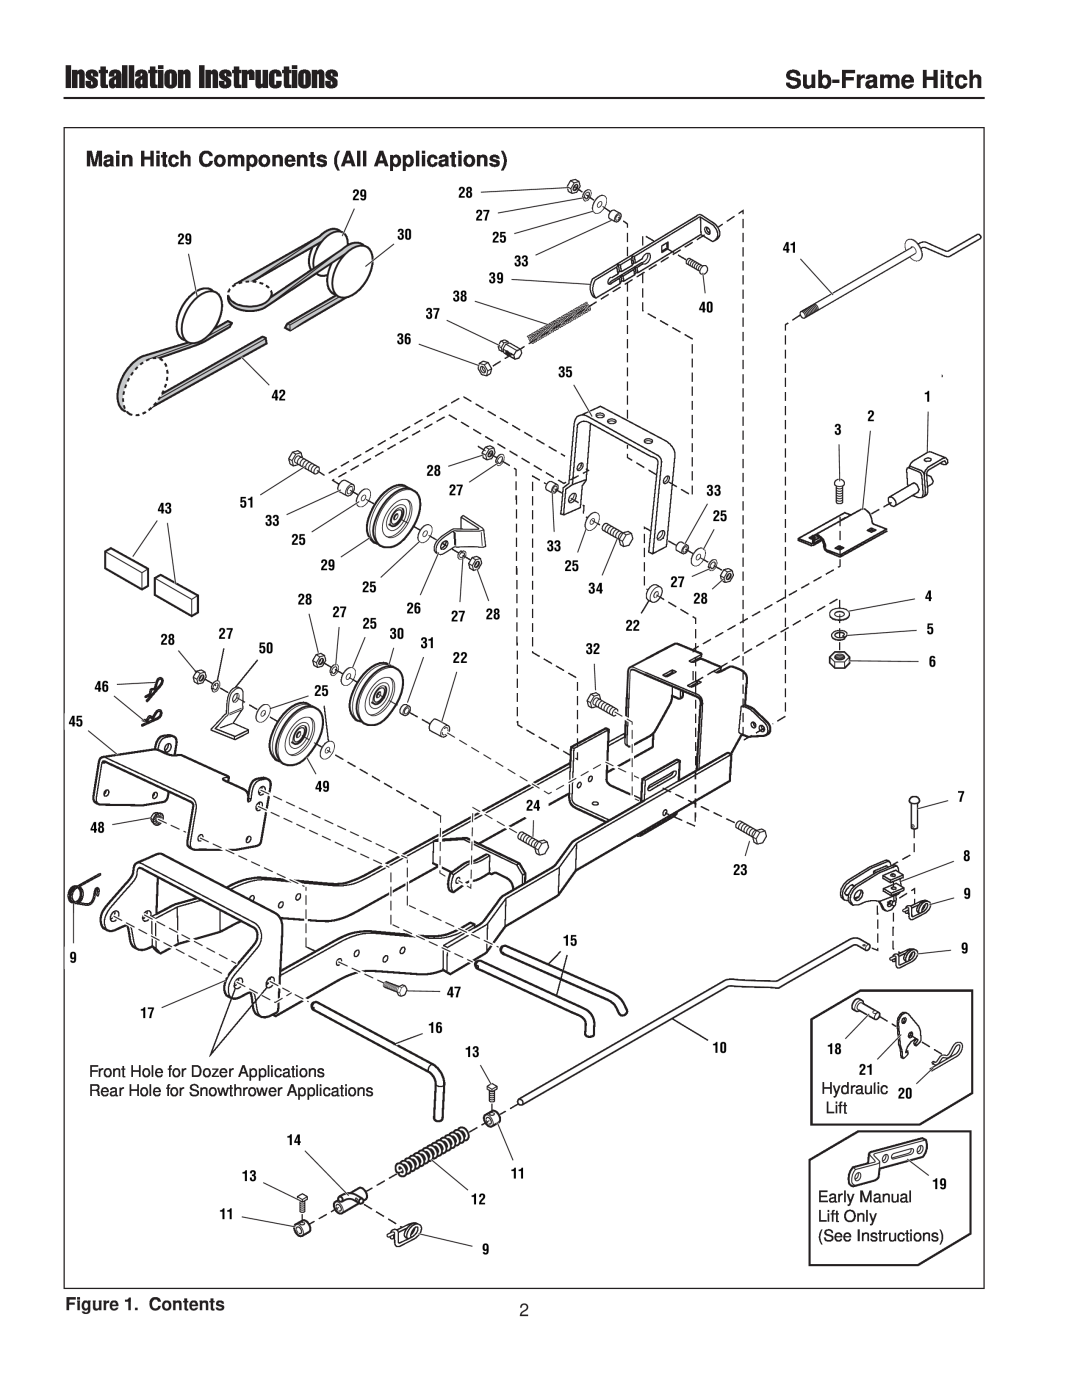 Briggs & Stratton 2800 Sub-Frame Hitch, Installation Instructions, Front Hole for Dozer Applications, Hydraulic, Lift 